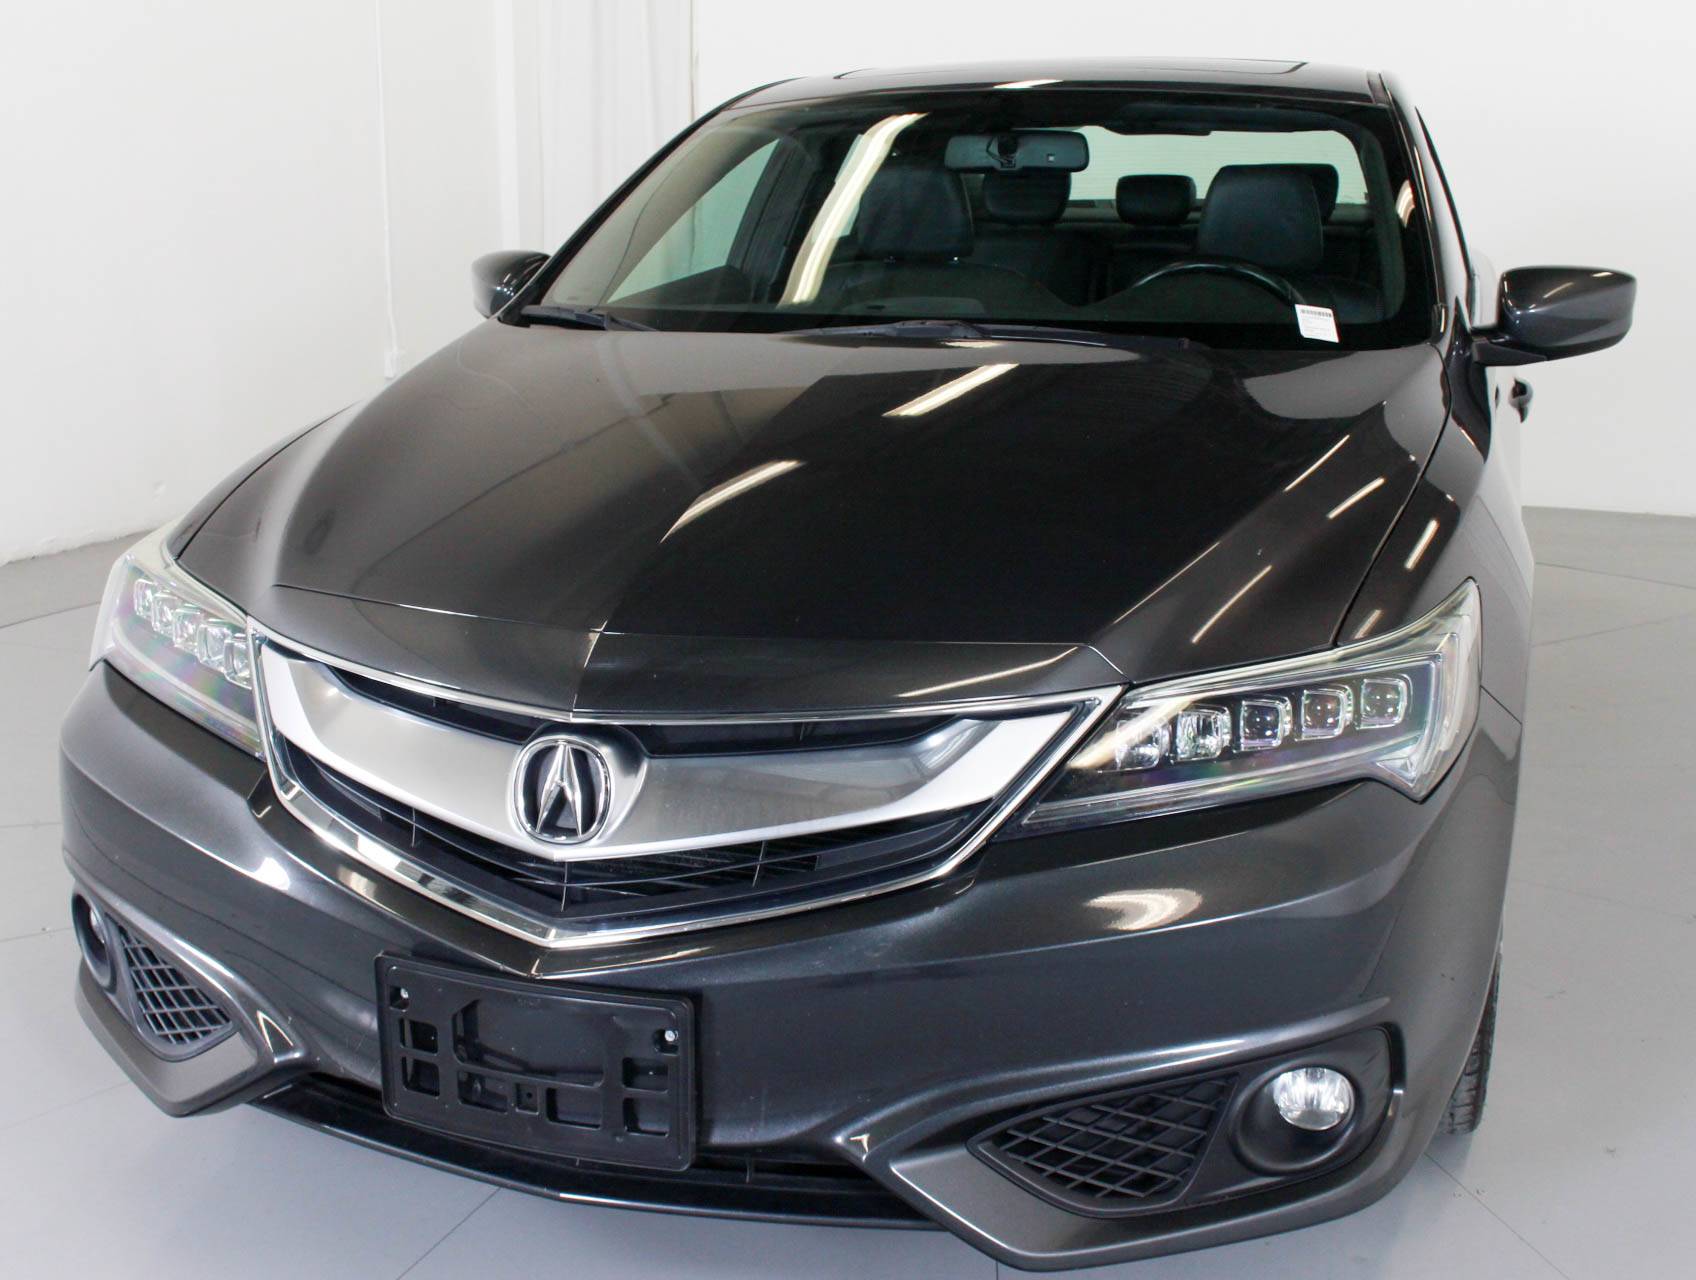 Florida Fine Cars - Used ACURA ILX 2016 MARGATE PREMIUM AND A-SPEC PACKAG